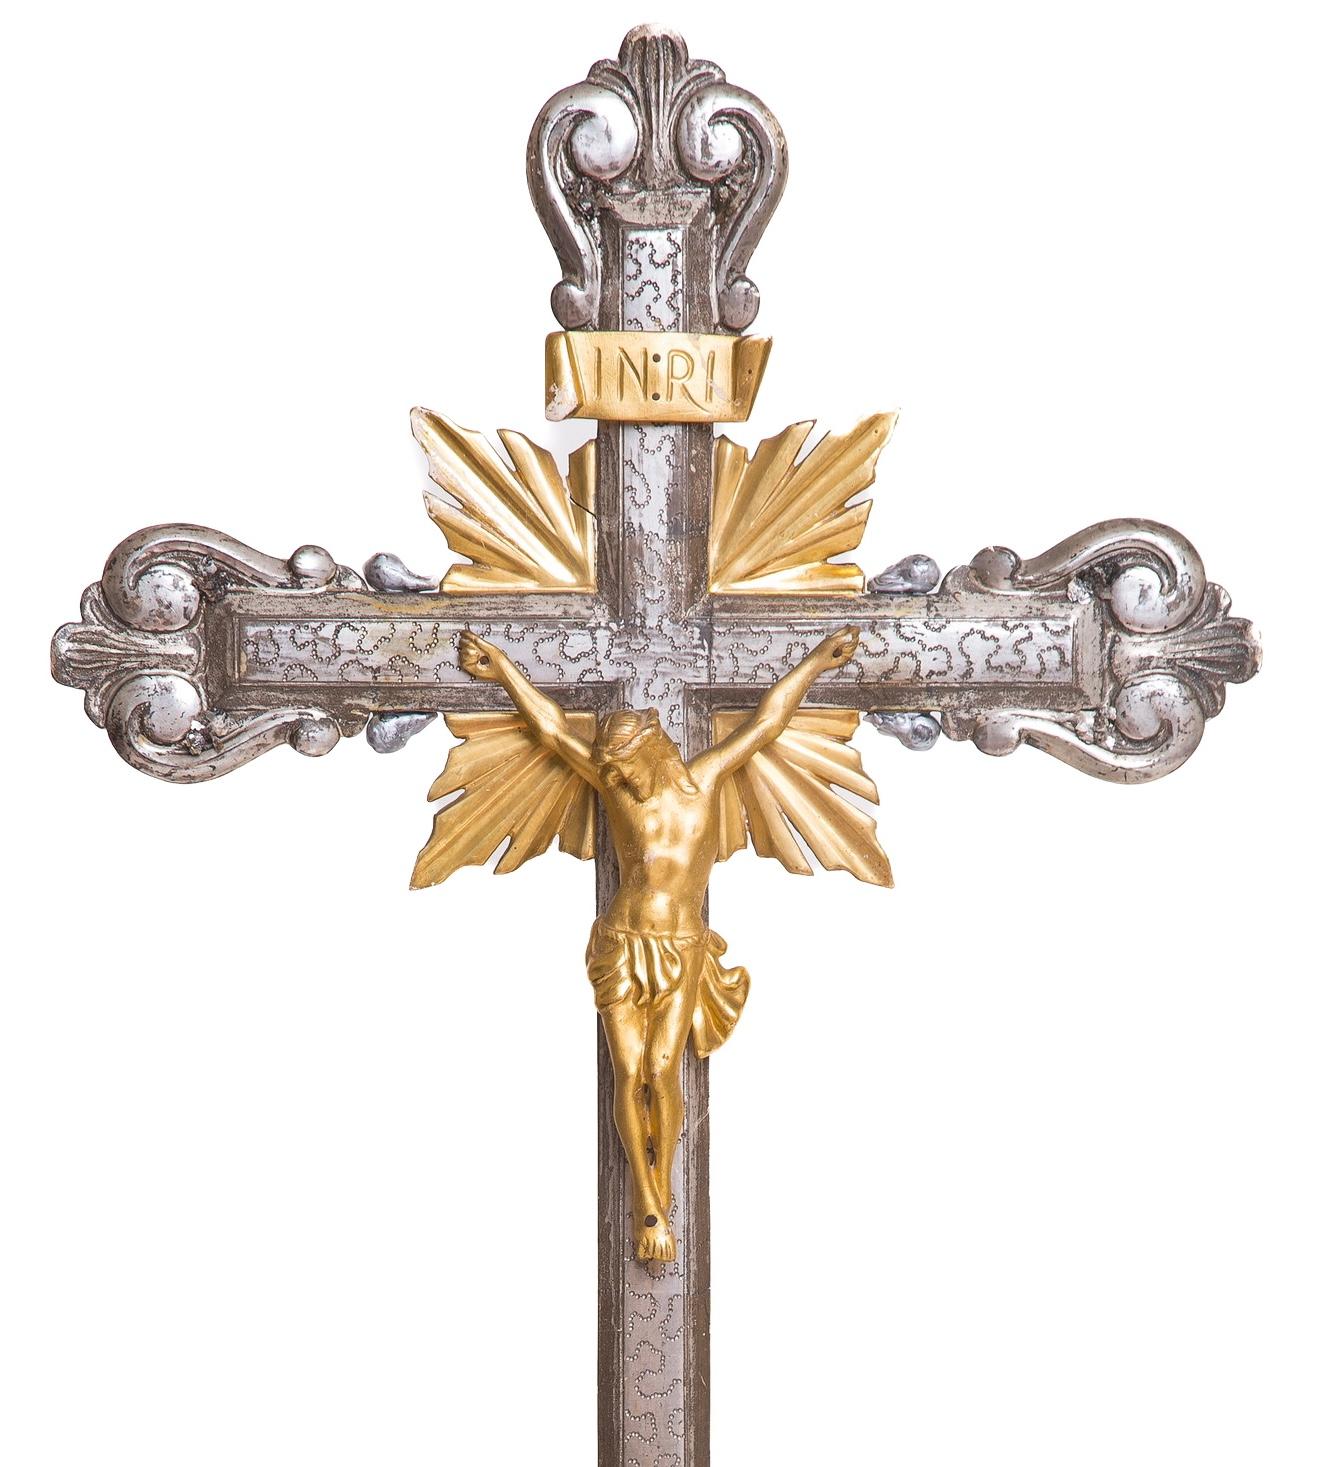 18th century Italian silver and gold leaf crucifix adorned with baroque pearls and mounted on a mica cluster and a calcite crystal. The mica specimen is from the Great Smoky Mountains and the calcite crystal is from Brazil. The crucifix has been